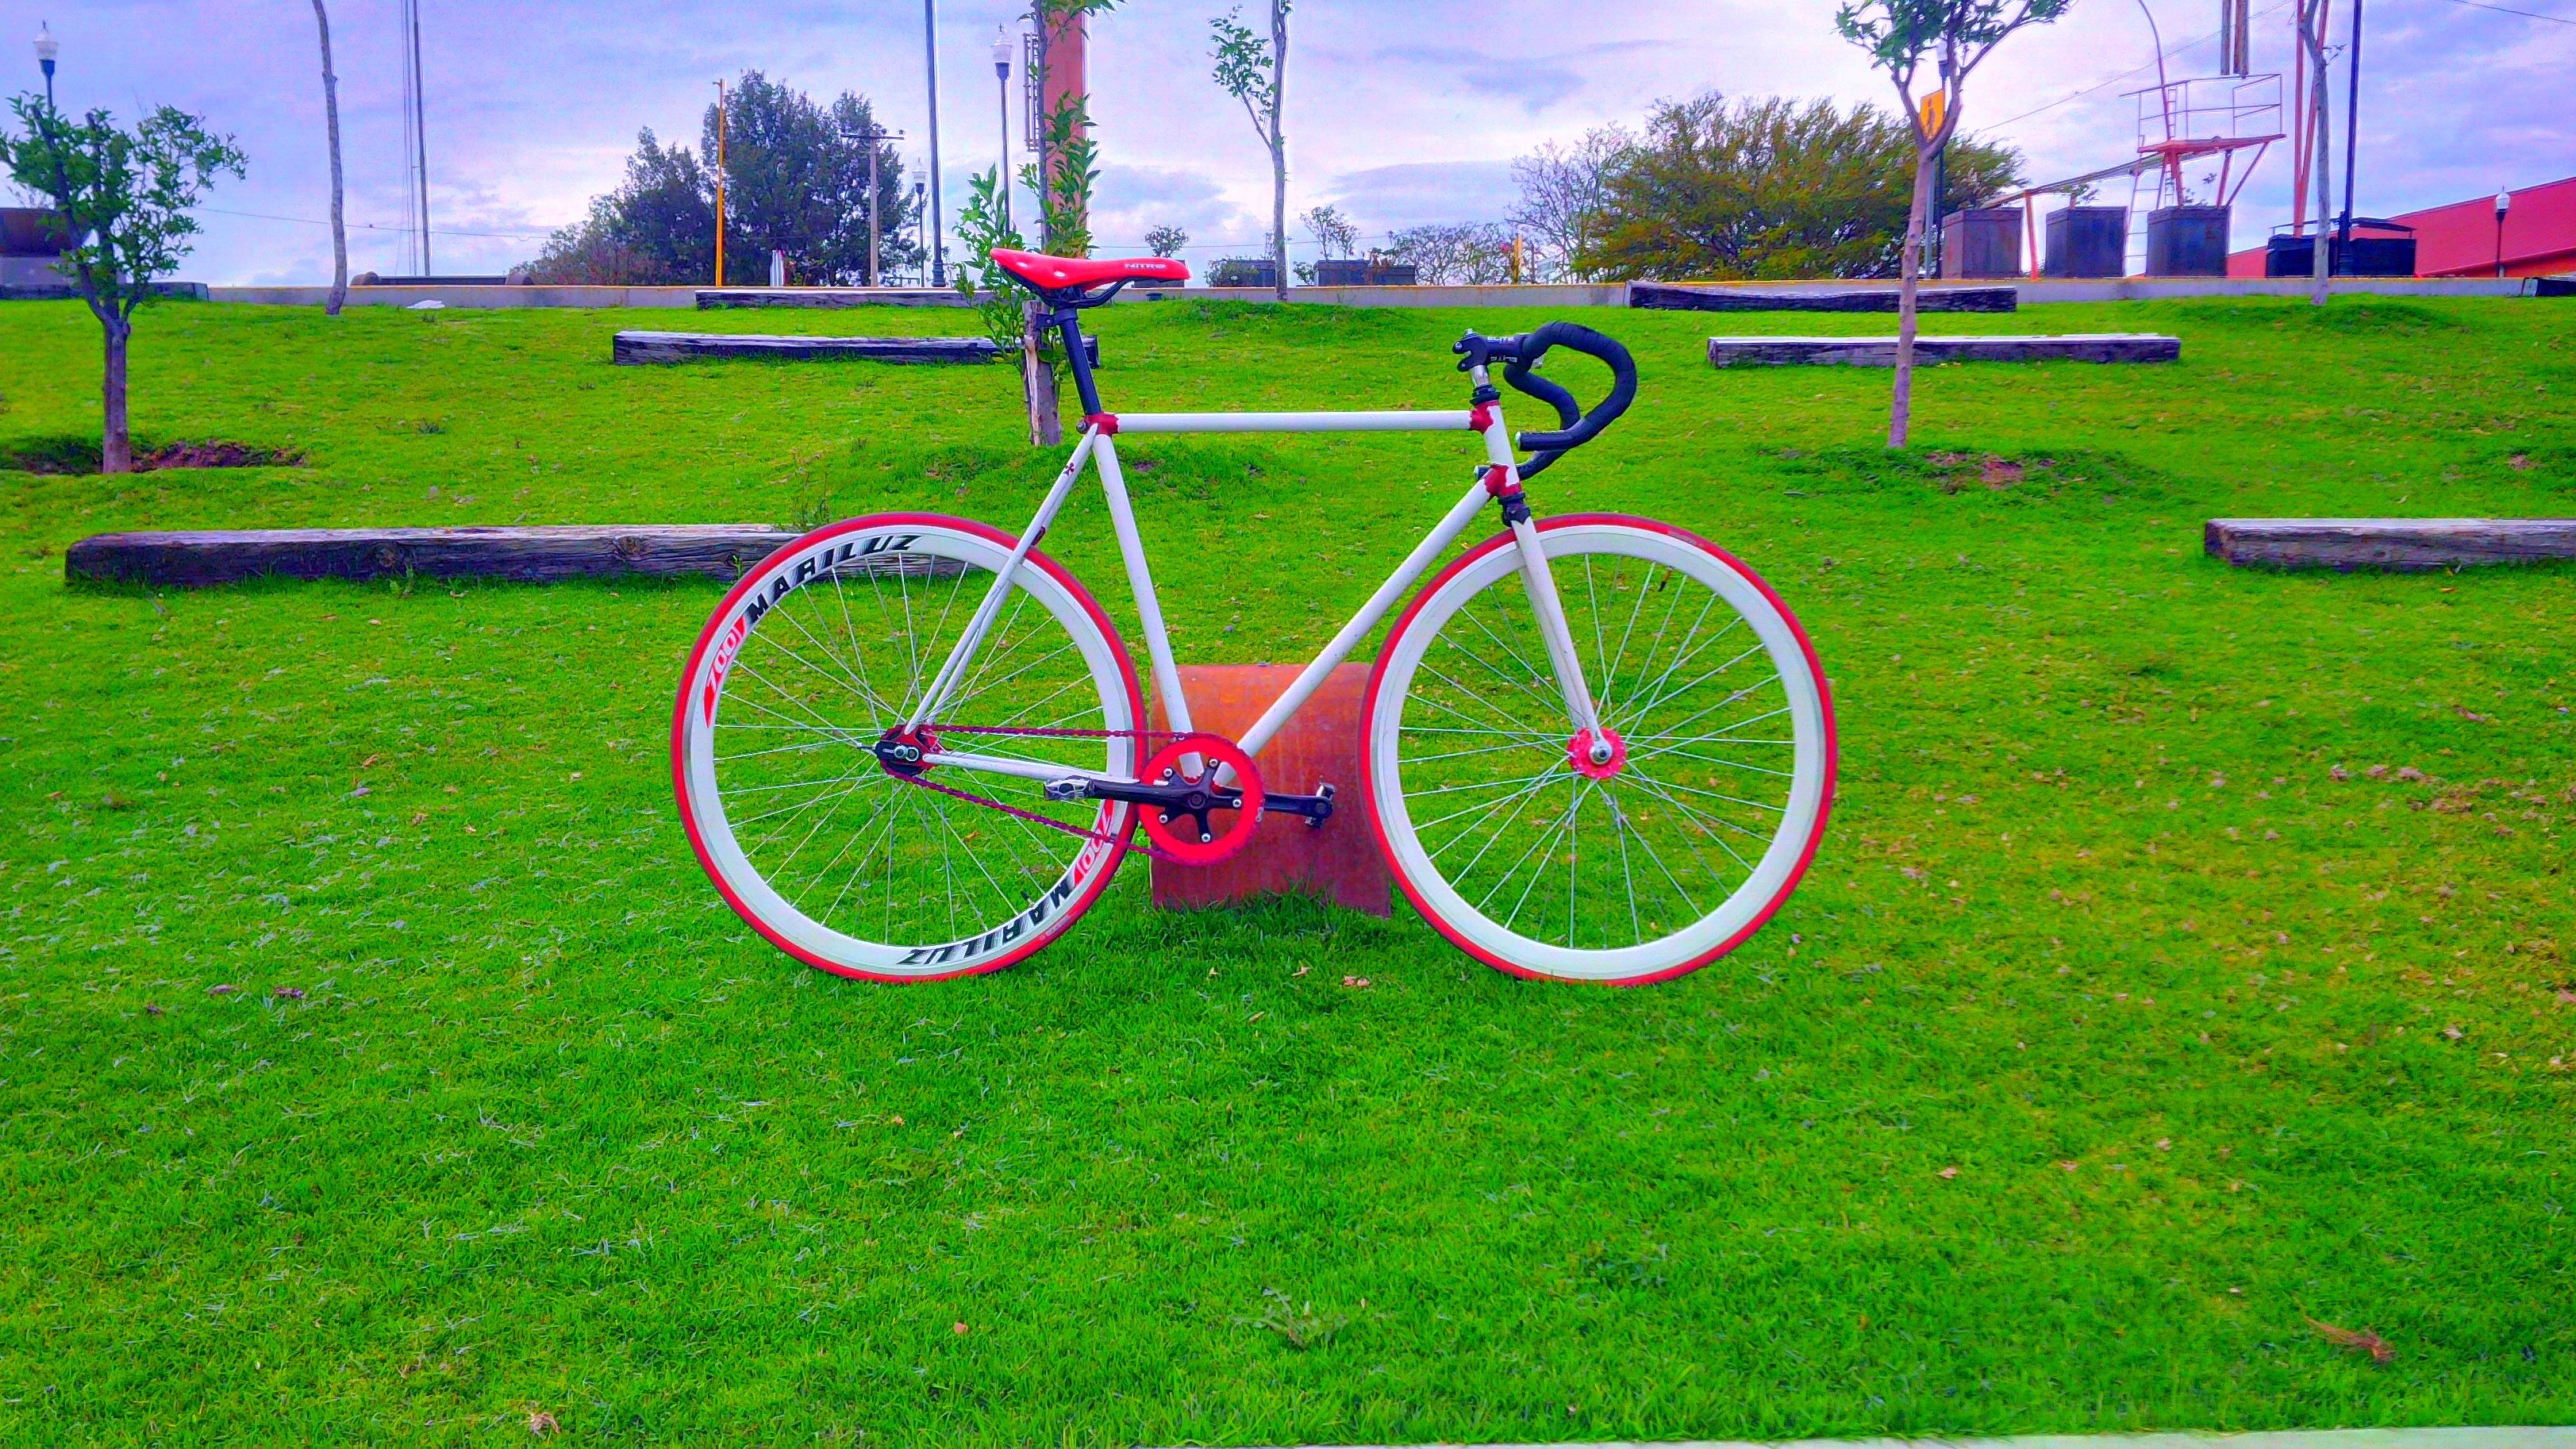 General 3246x1826 fixie vehicle grass outdoors bicycle